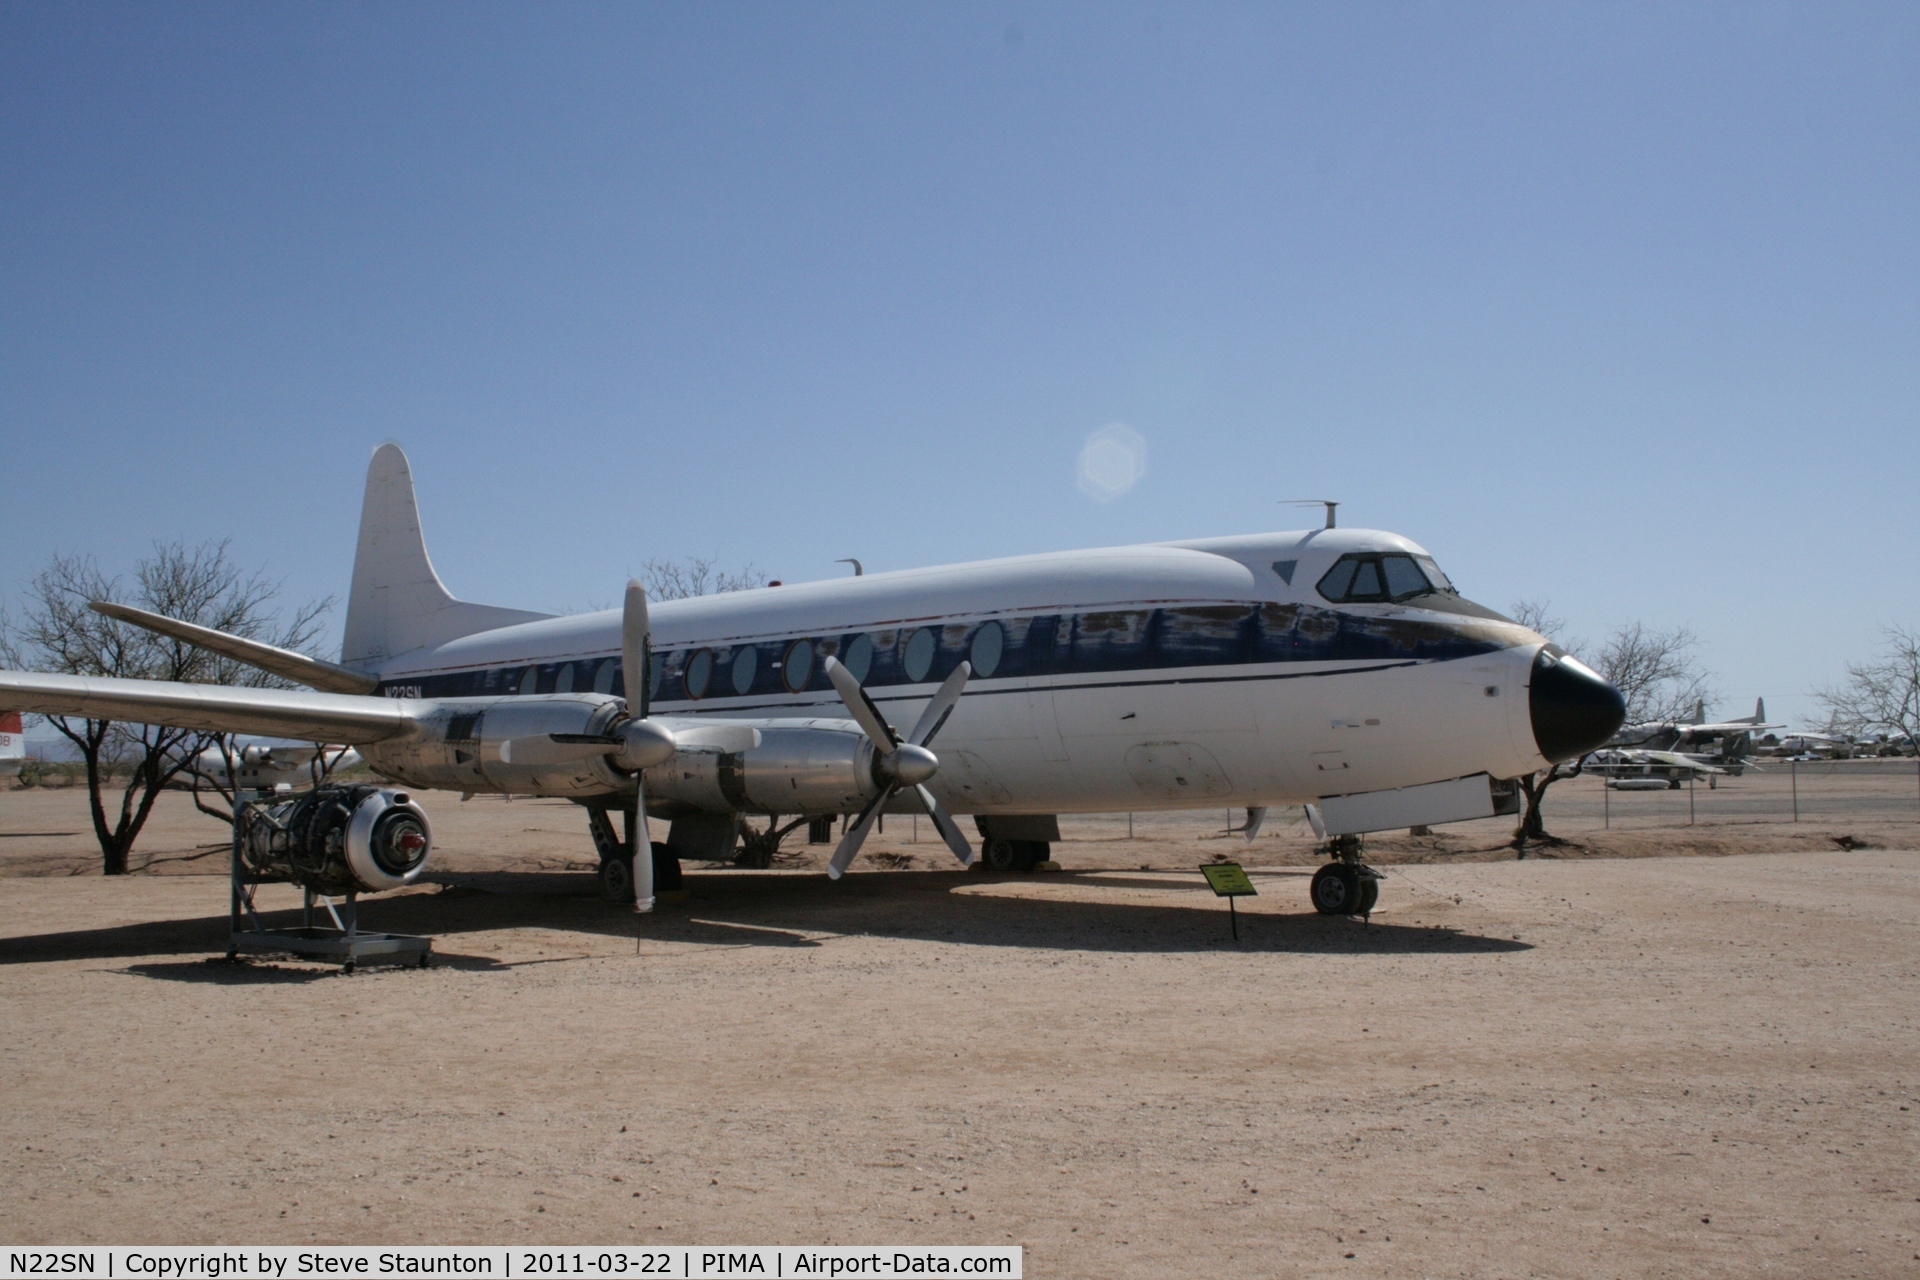 N22SN, 1954 Vickers Viscount 724 C/N 40, Taken at Pima Air and Space Museum, in March 2011 whilst on an Aeroprint Aviation tour